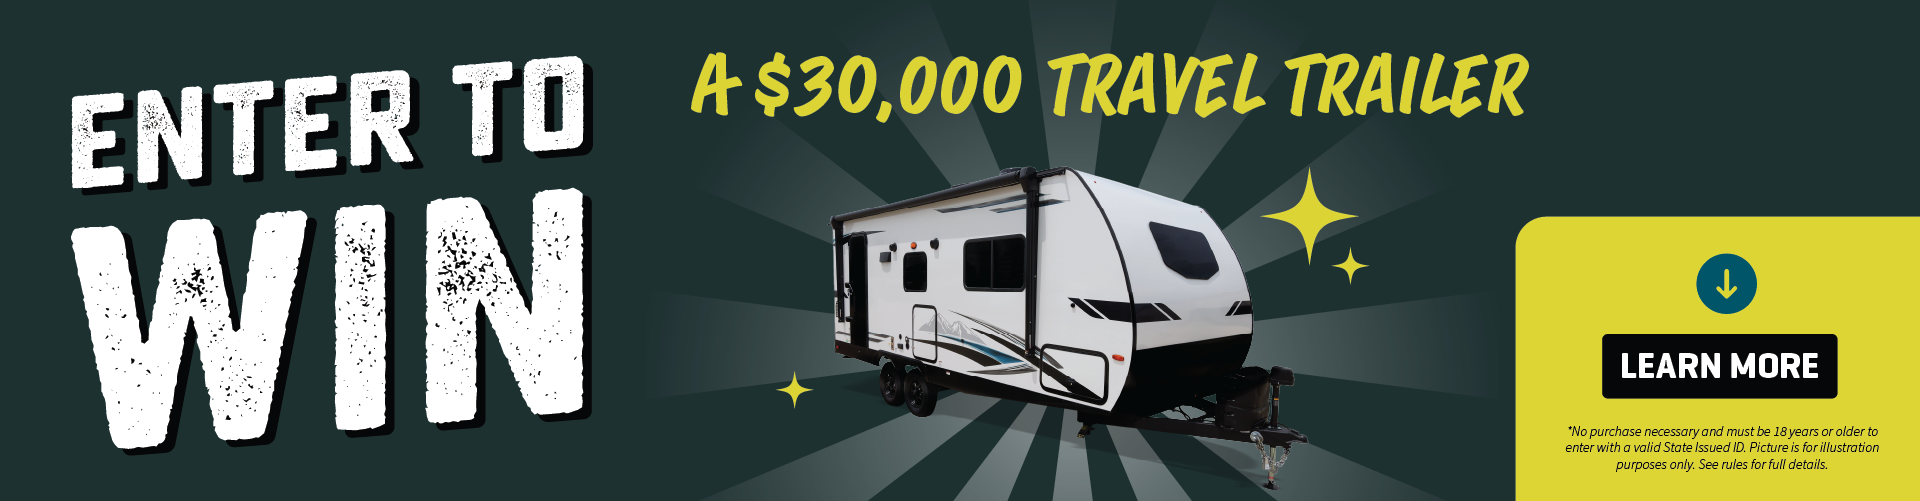 Enter to Win A New $30,000 Travel Trailer!